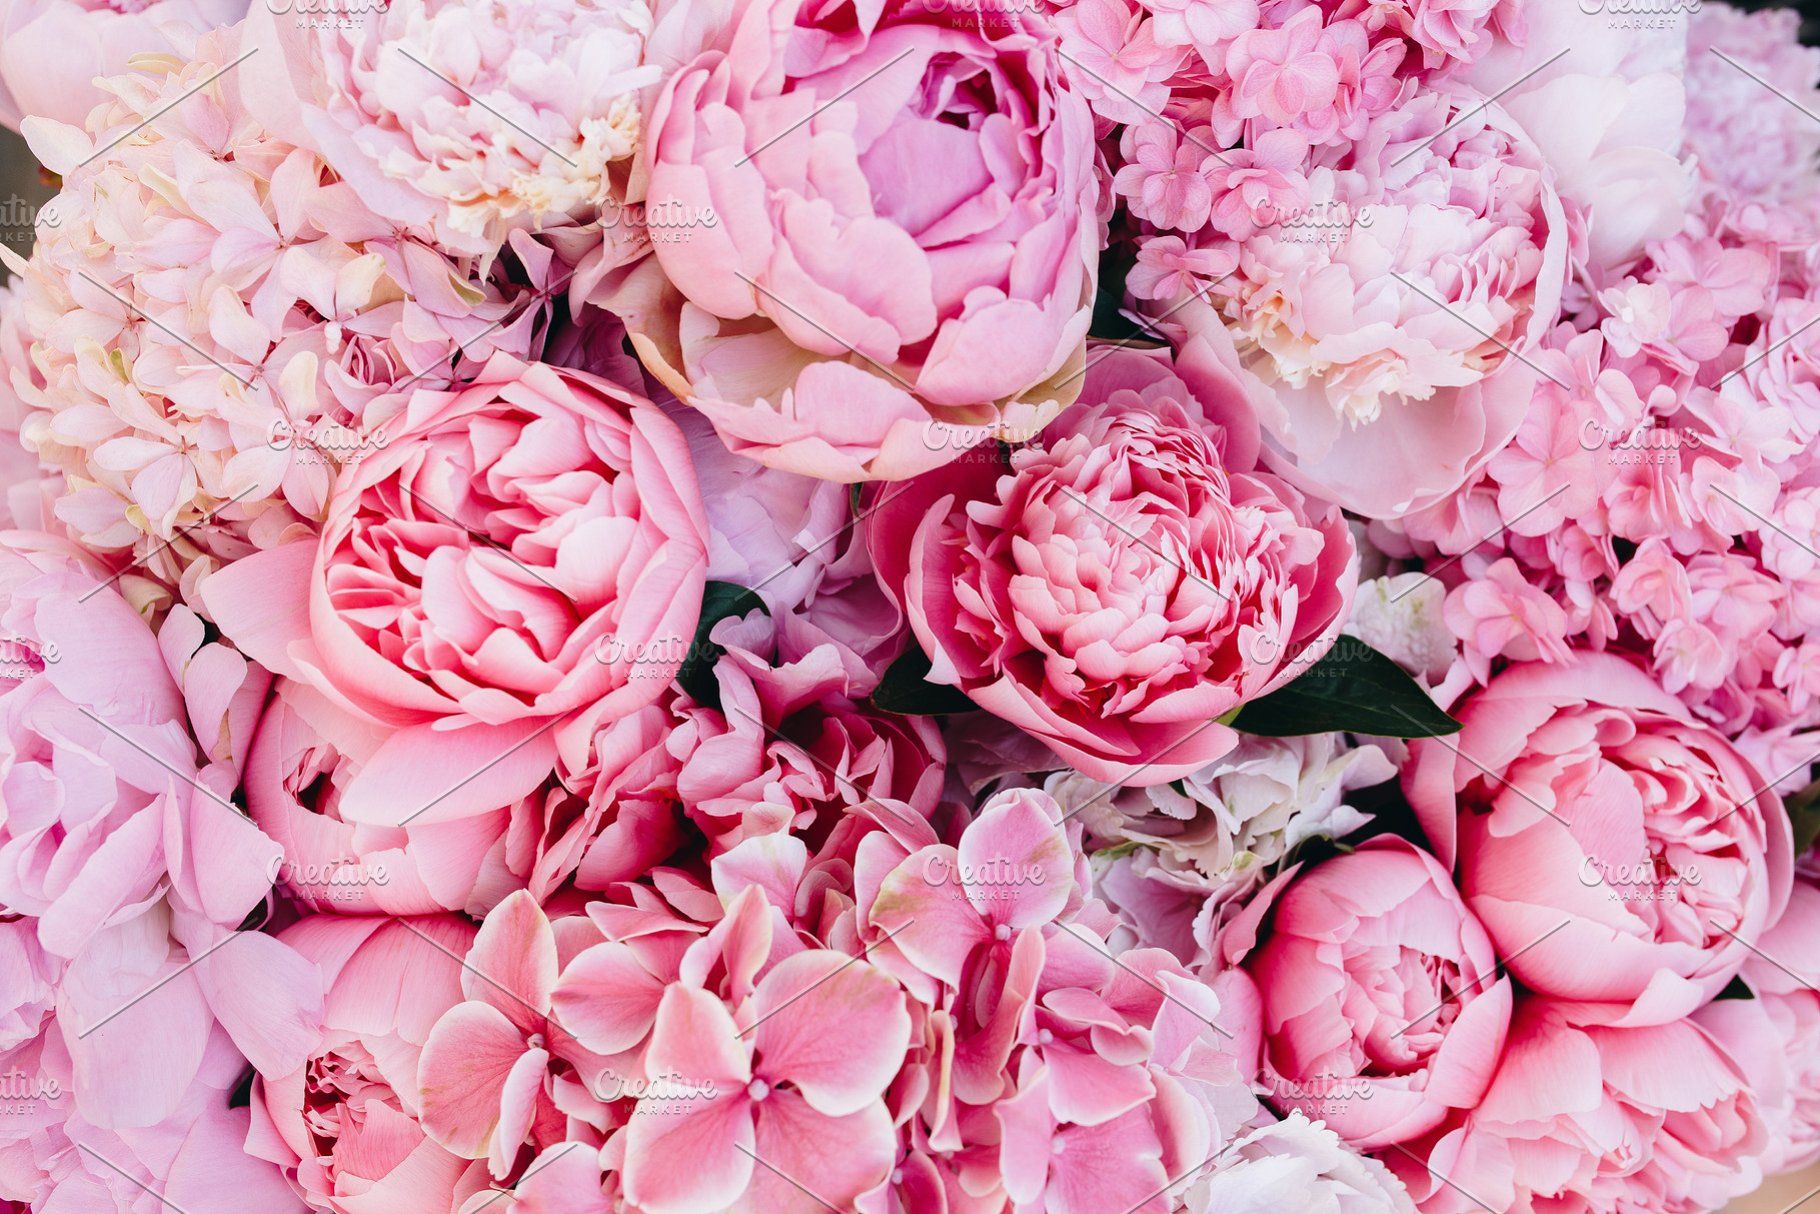 Peonies Wallpapers Hd posted by Zoey Cunningham.